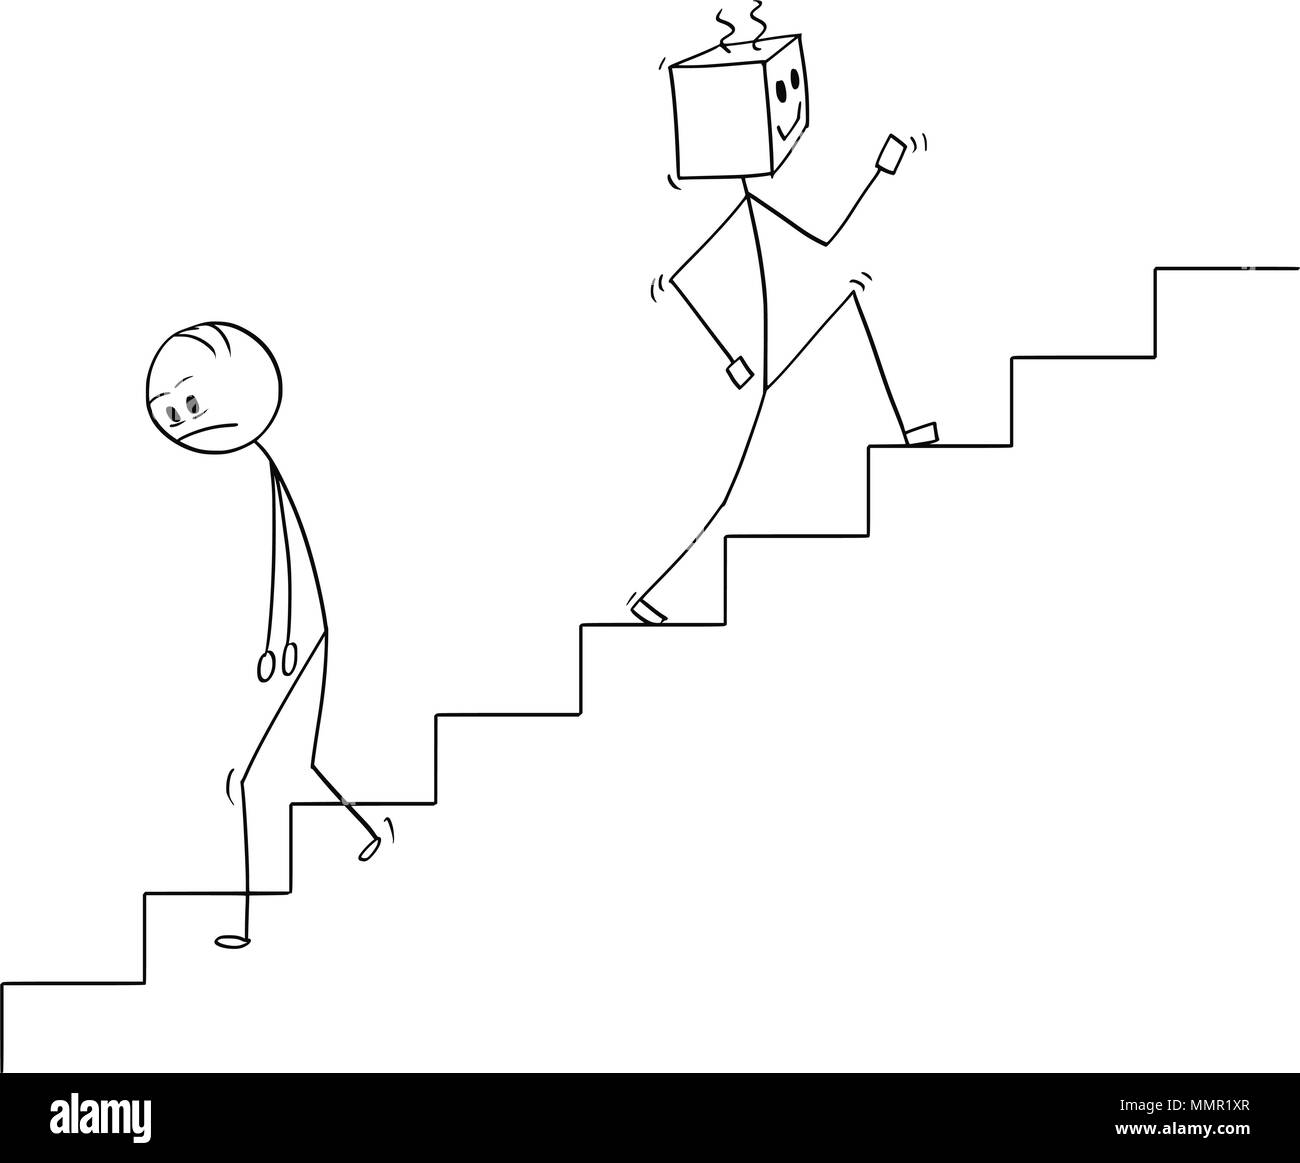 Cartoon of Human Going Down the Stairs and Robot Moving Up Stock Vector